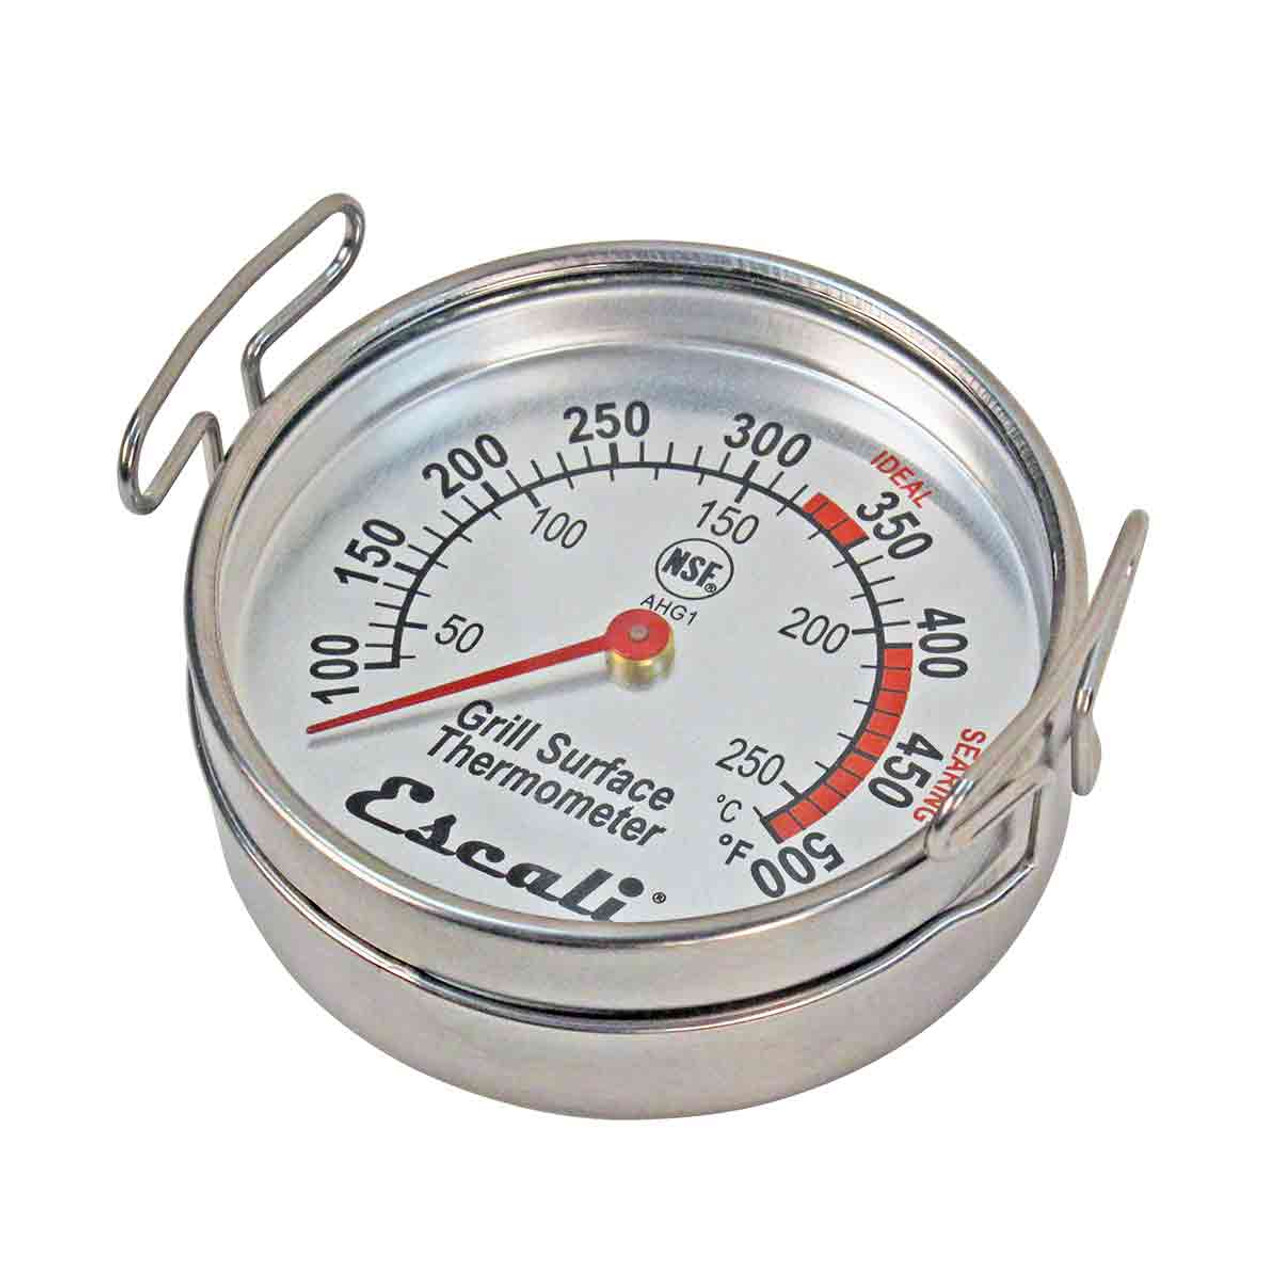 Grill Surface Thermometer - Walton's